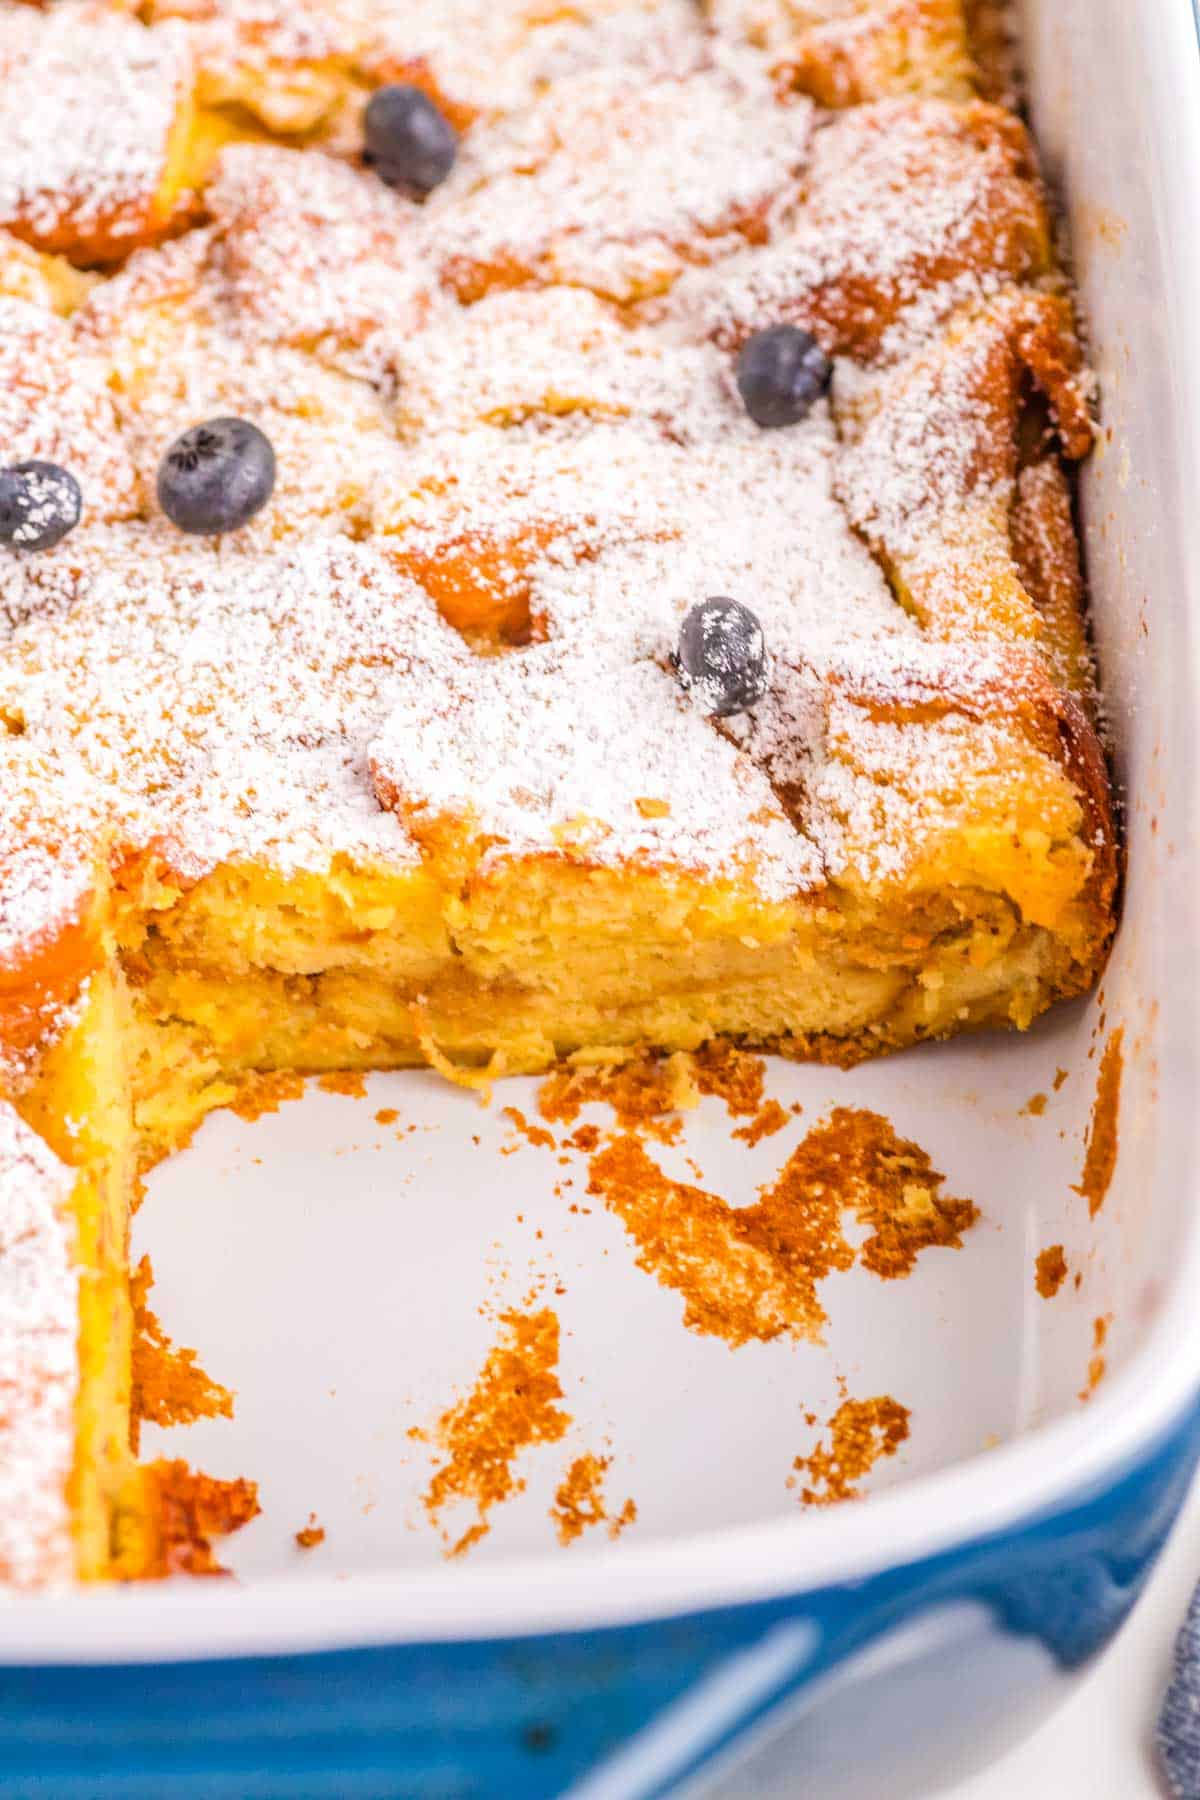 Brioche French Toast Casserole in a blue casserole dish garnished with powdered sugar and blueberries.